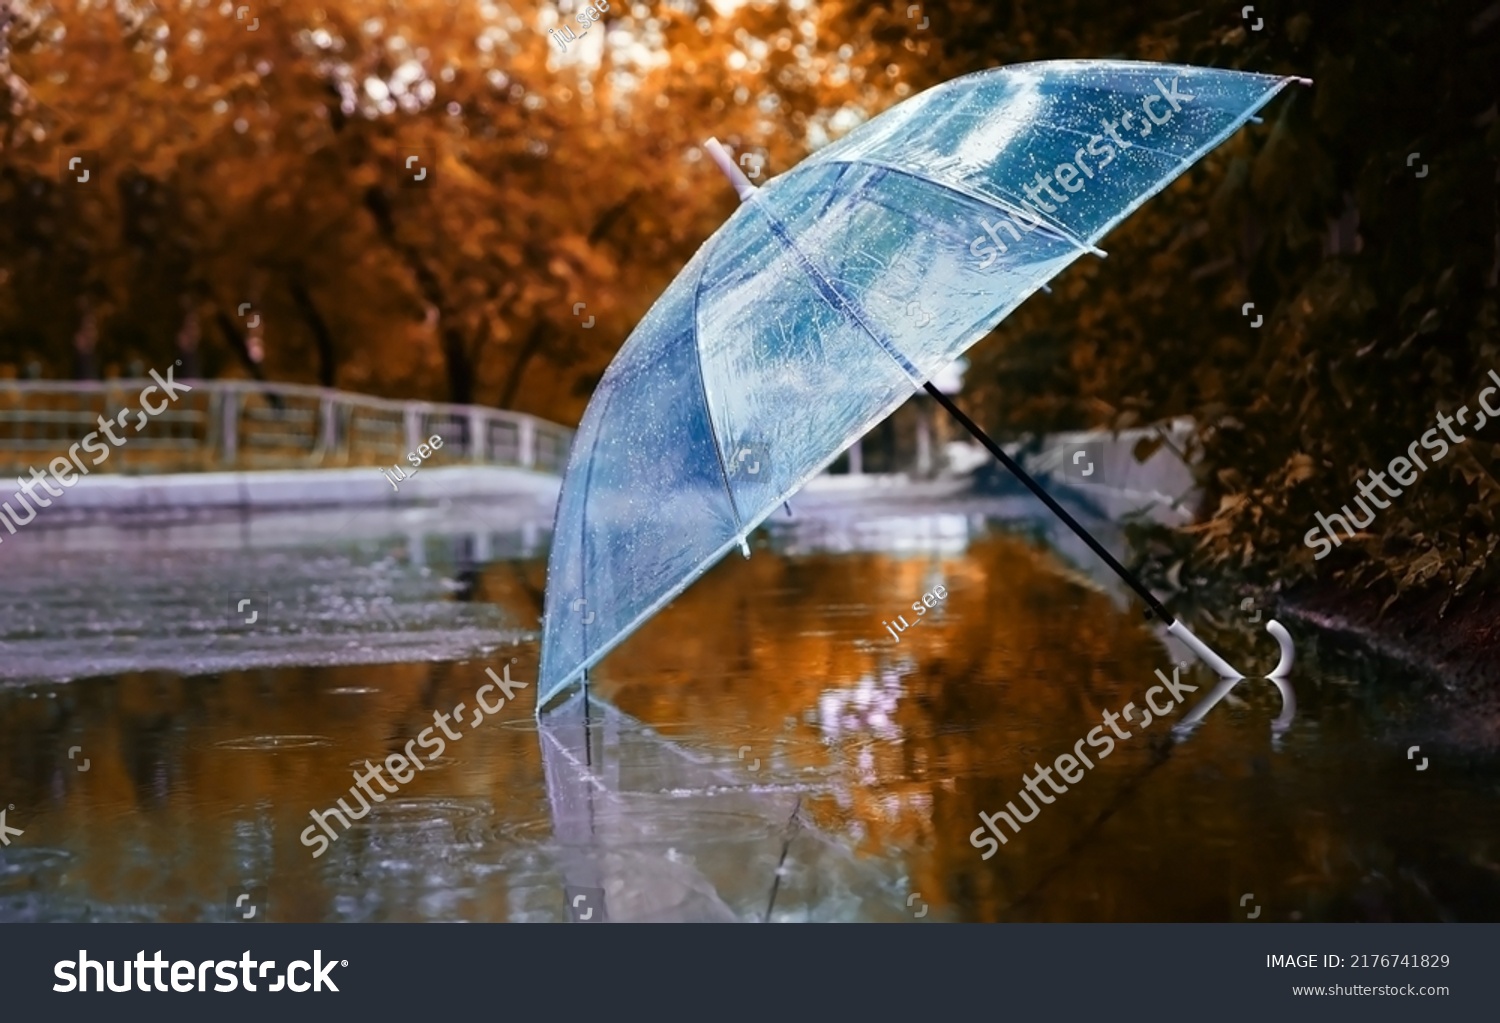 transparent umbrella in water drops in puddle on road, natural abstract blurred background. autumn landscape. symbol of rainy season, bad wet stormy weather. melancholy mood #2176741829